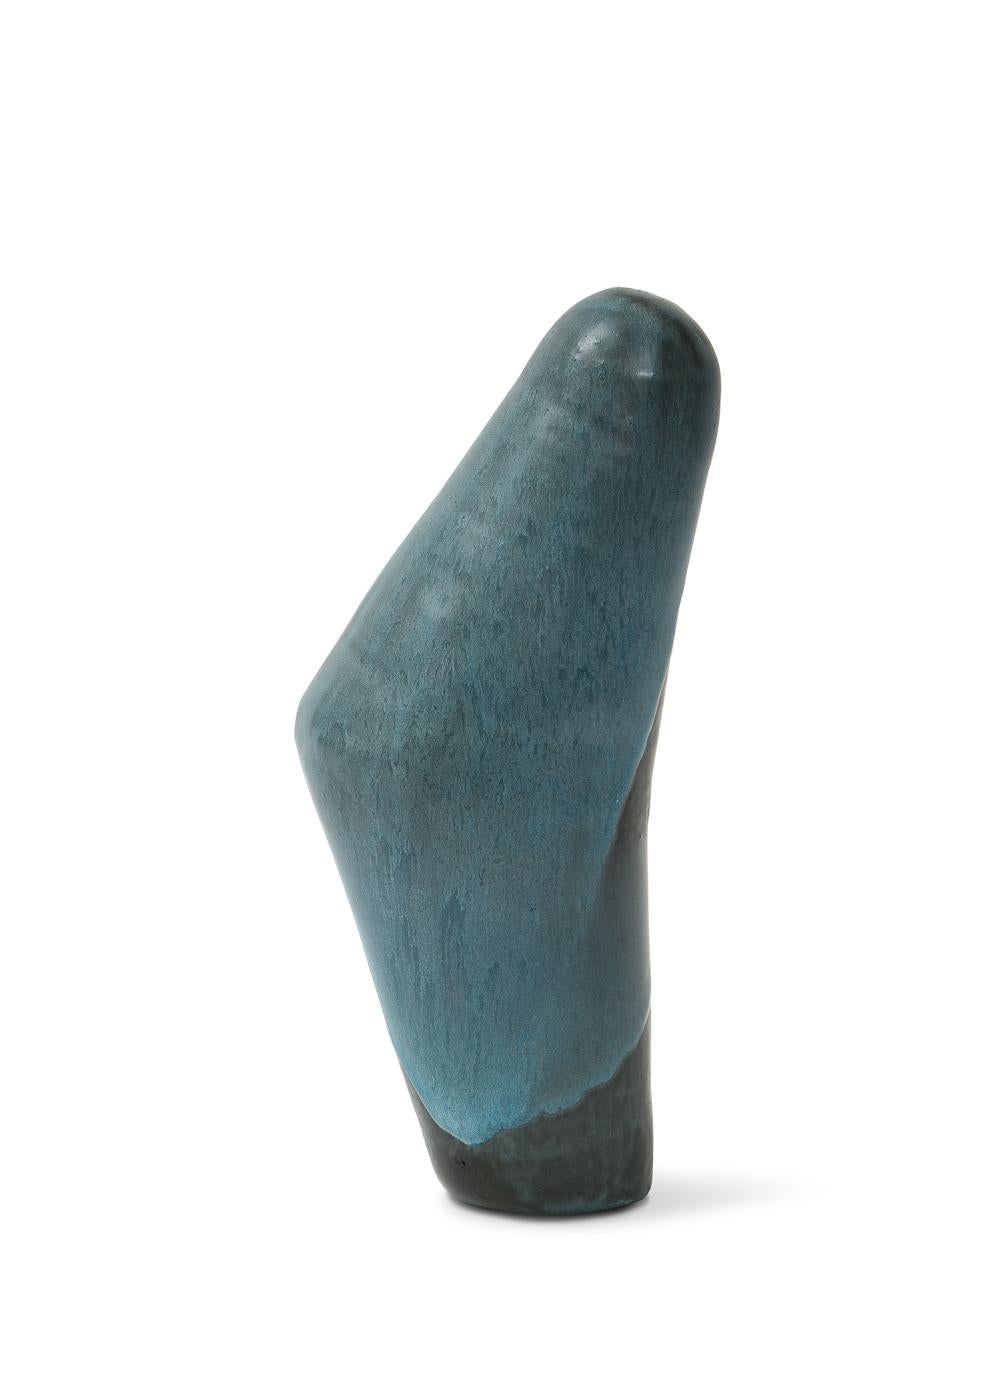 Elbow sculpture #2 by David Haskell. Ceramic sculpture with blue glazes. Signed on underside.